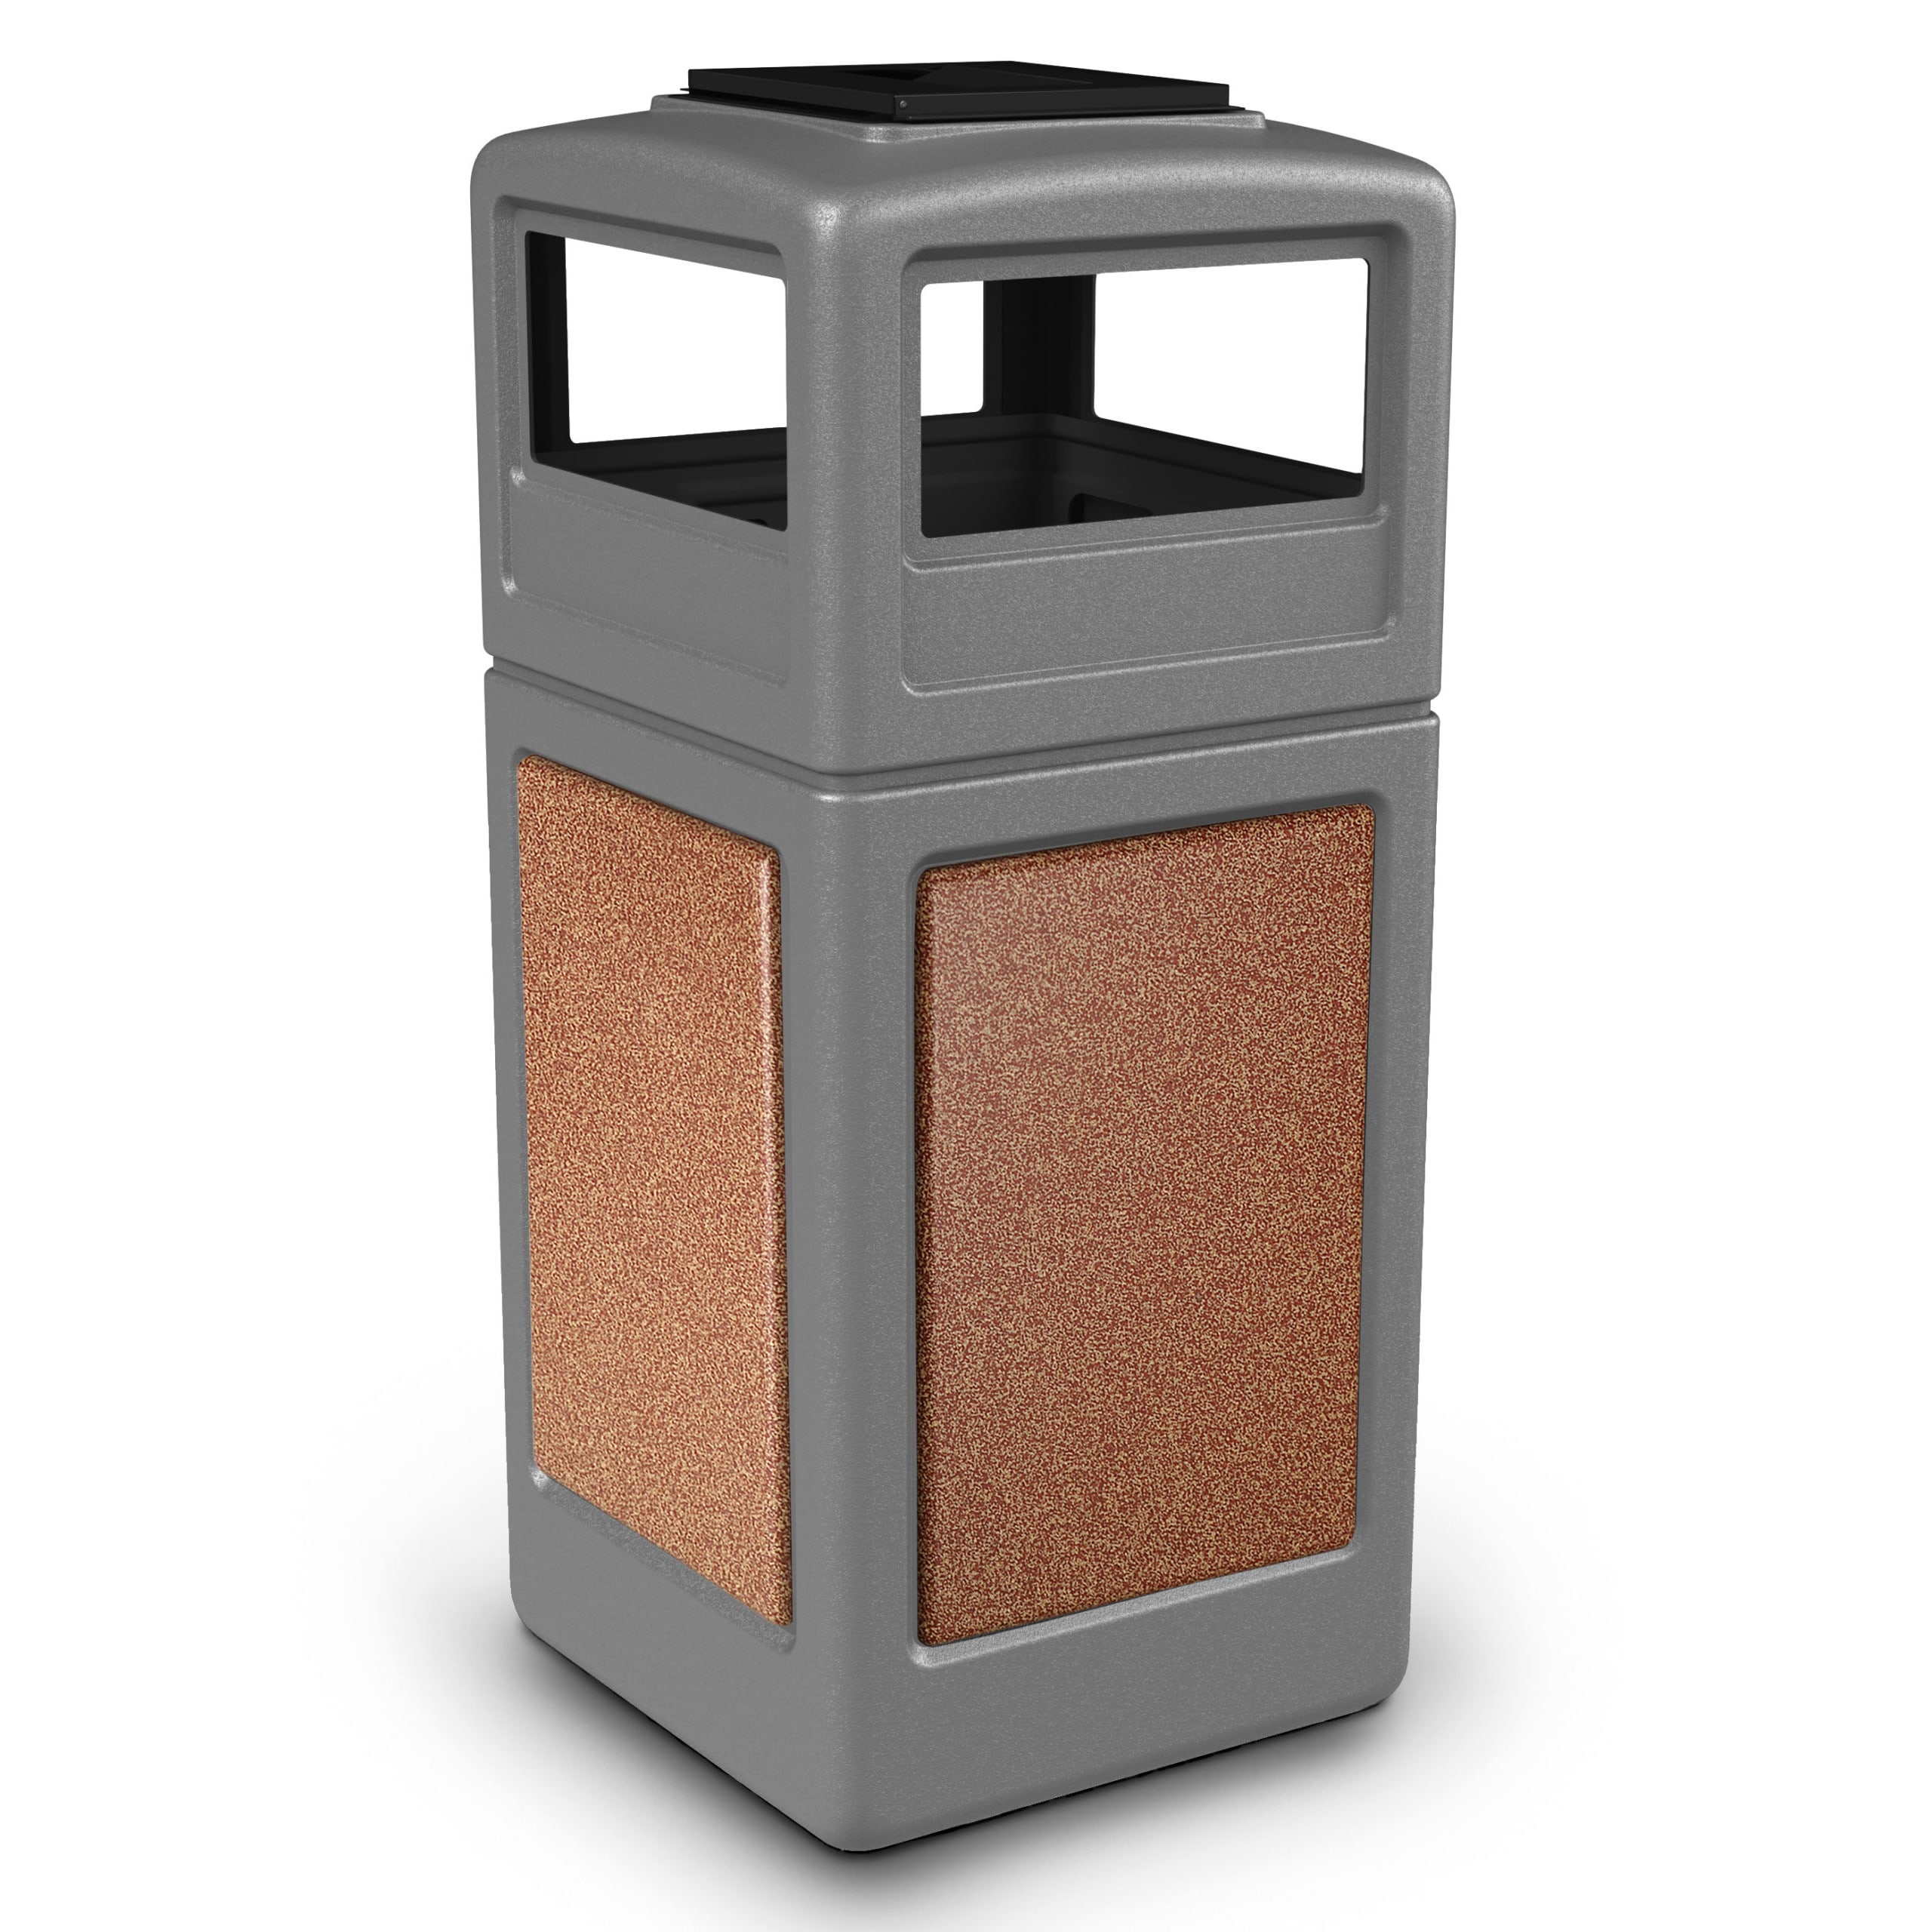 https://www.commercialzone.com/wp-content/uploads/2022/09/720547K-StoneTec-Series-42-Gallon-Square-Waste-Receptacle-with-Ashtray-Dome-Lid-Gray-Sedona-scaled-1.jpg